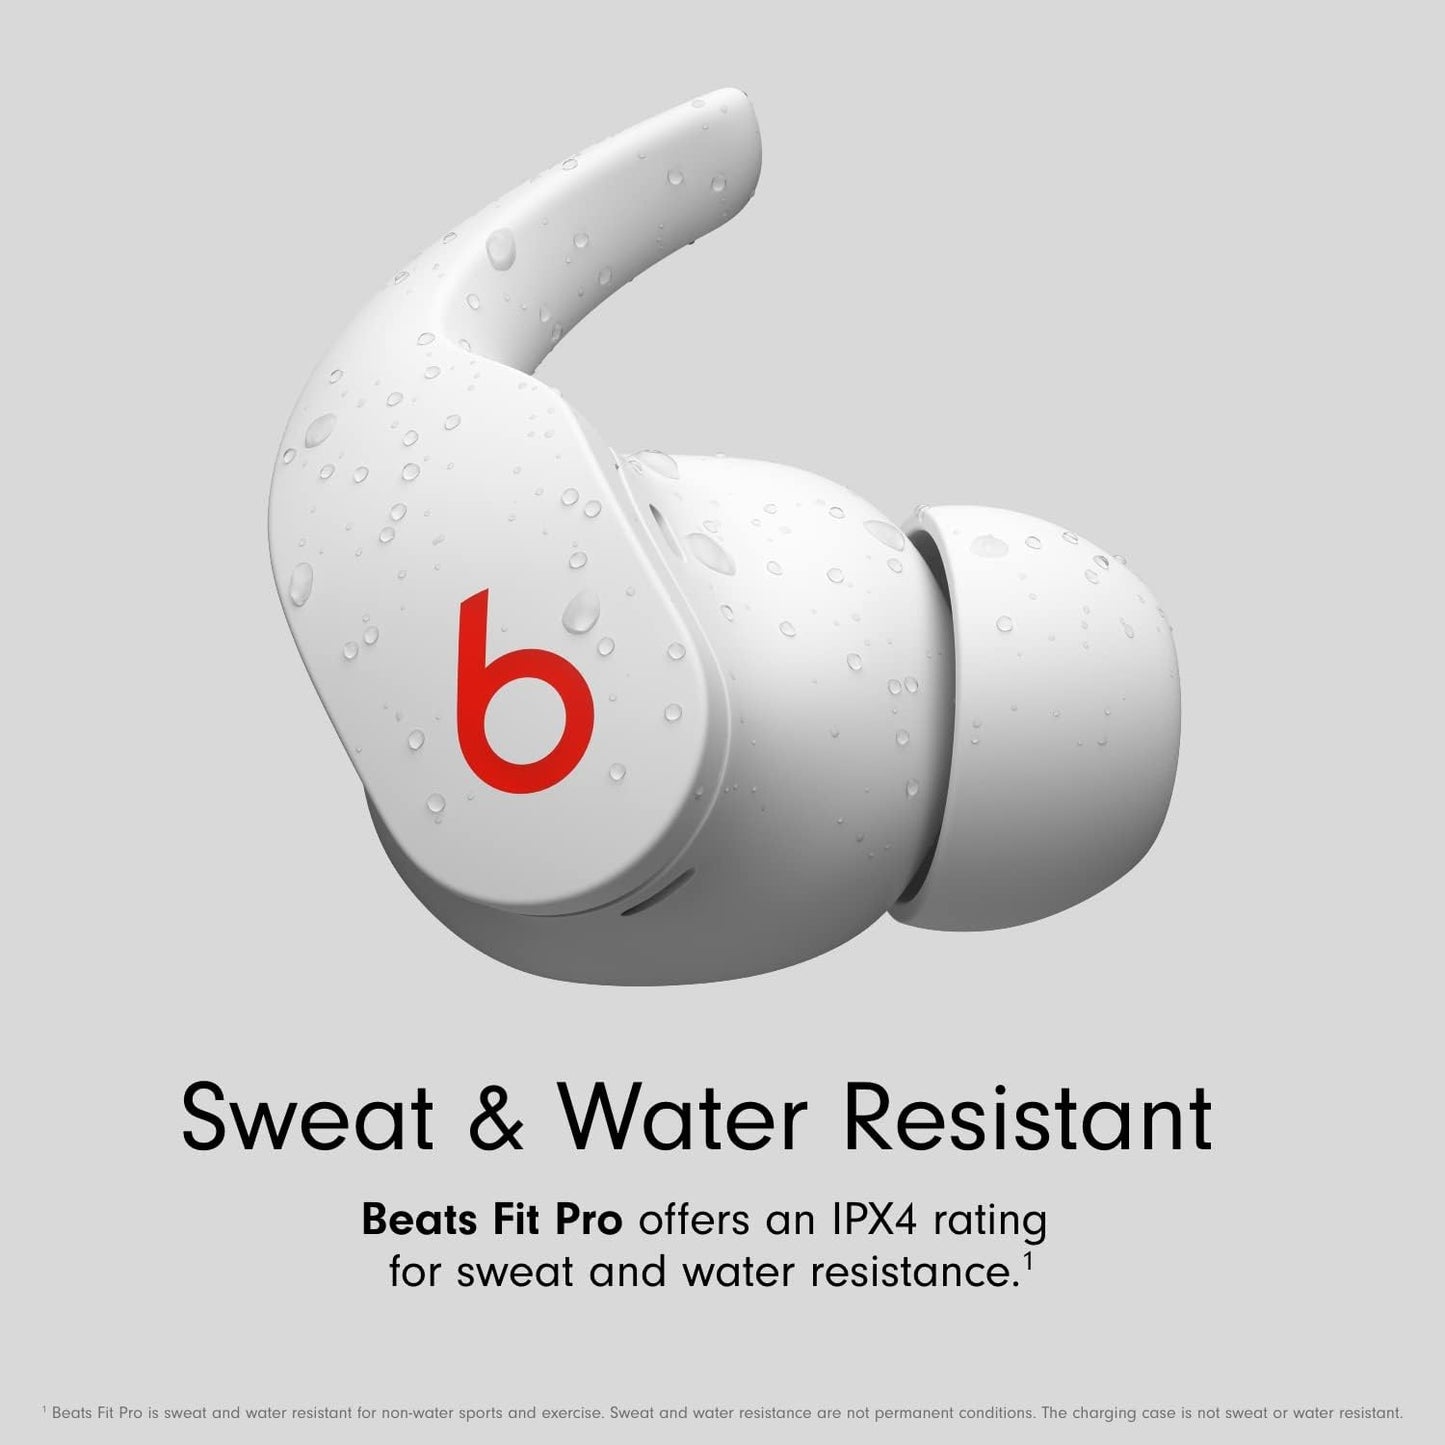 Beats Fit Pro - True Wireless Noise Cancelling Earbuds • Apple H1 Headphone Chip • Compatible with Apple & Android • Class 1 Bluetooth • Built-in Microphone • 6 Hours of Listening Time • Beats White